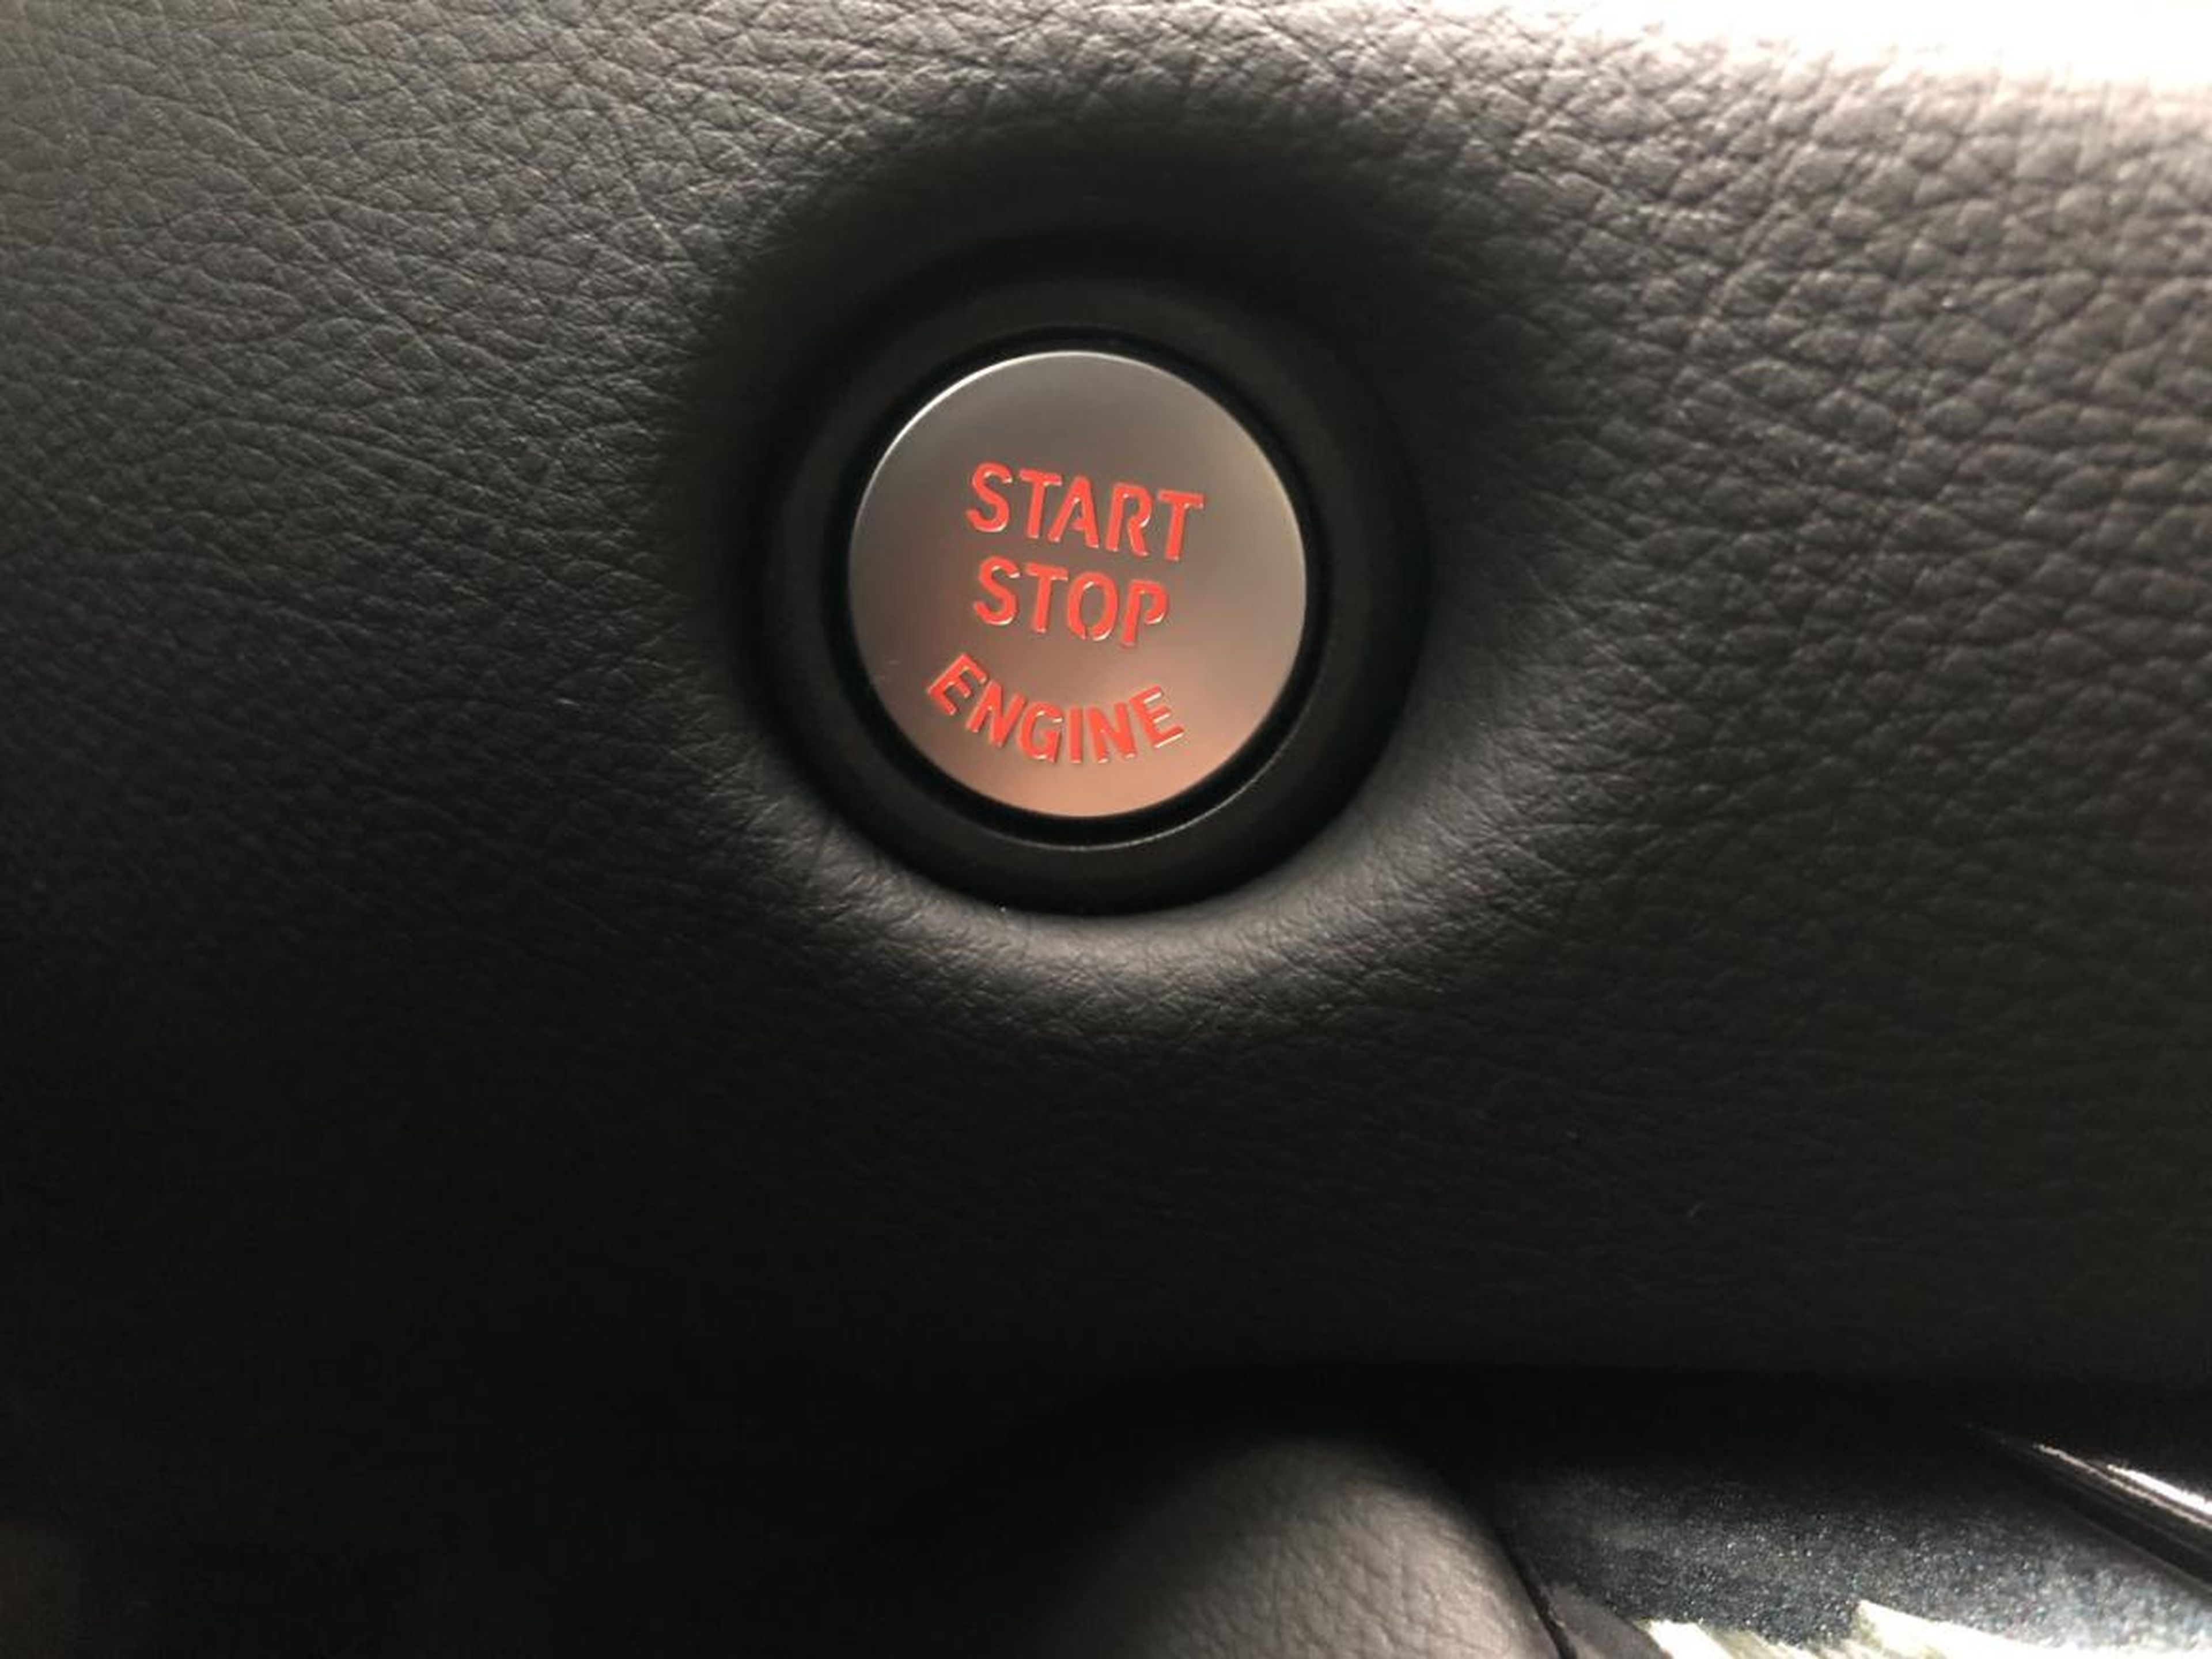 The push-button start-stop is awkwardly located behind the wheel.